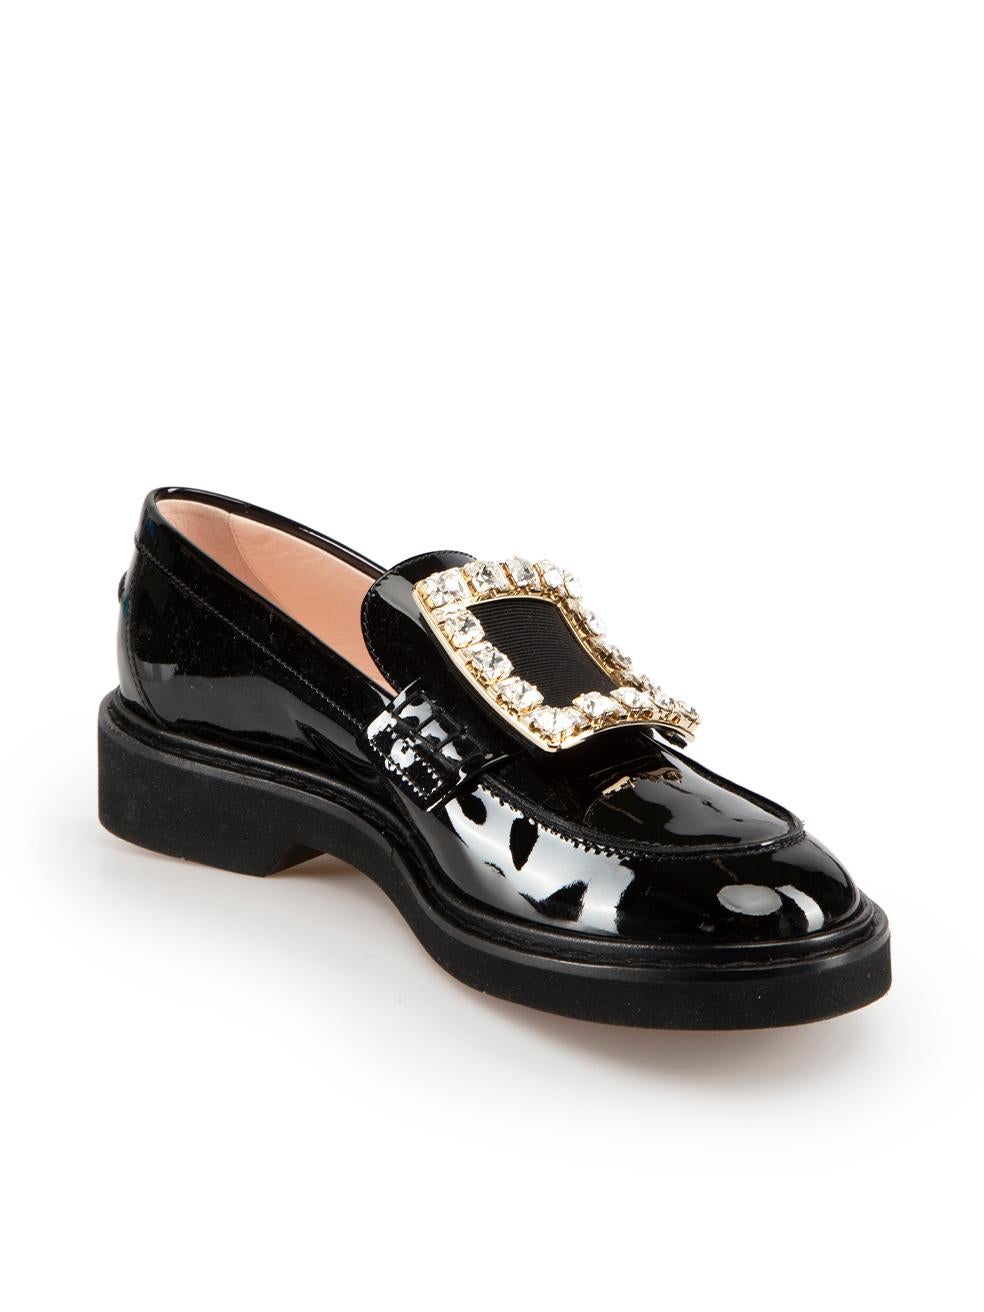 CONDITION is Never worn. No visible wear to shoes is evident on this new Roger Vivier designer resale item.
 
 Details
 Black
 Patent leather
 Slip on loafers
 Round toe
 Low heel
 Gemstone buckle accent
 
 
 Made in Italy
 
 Composition
 EXTERIOR: